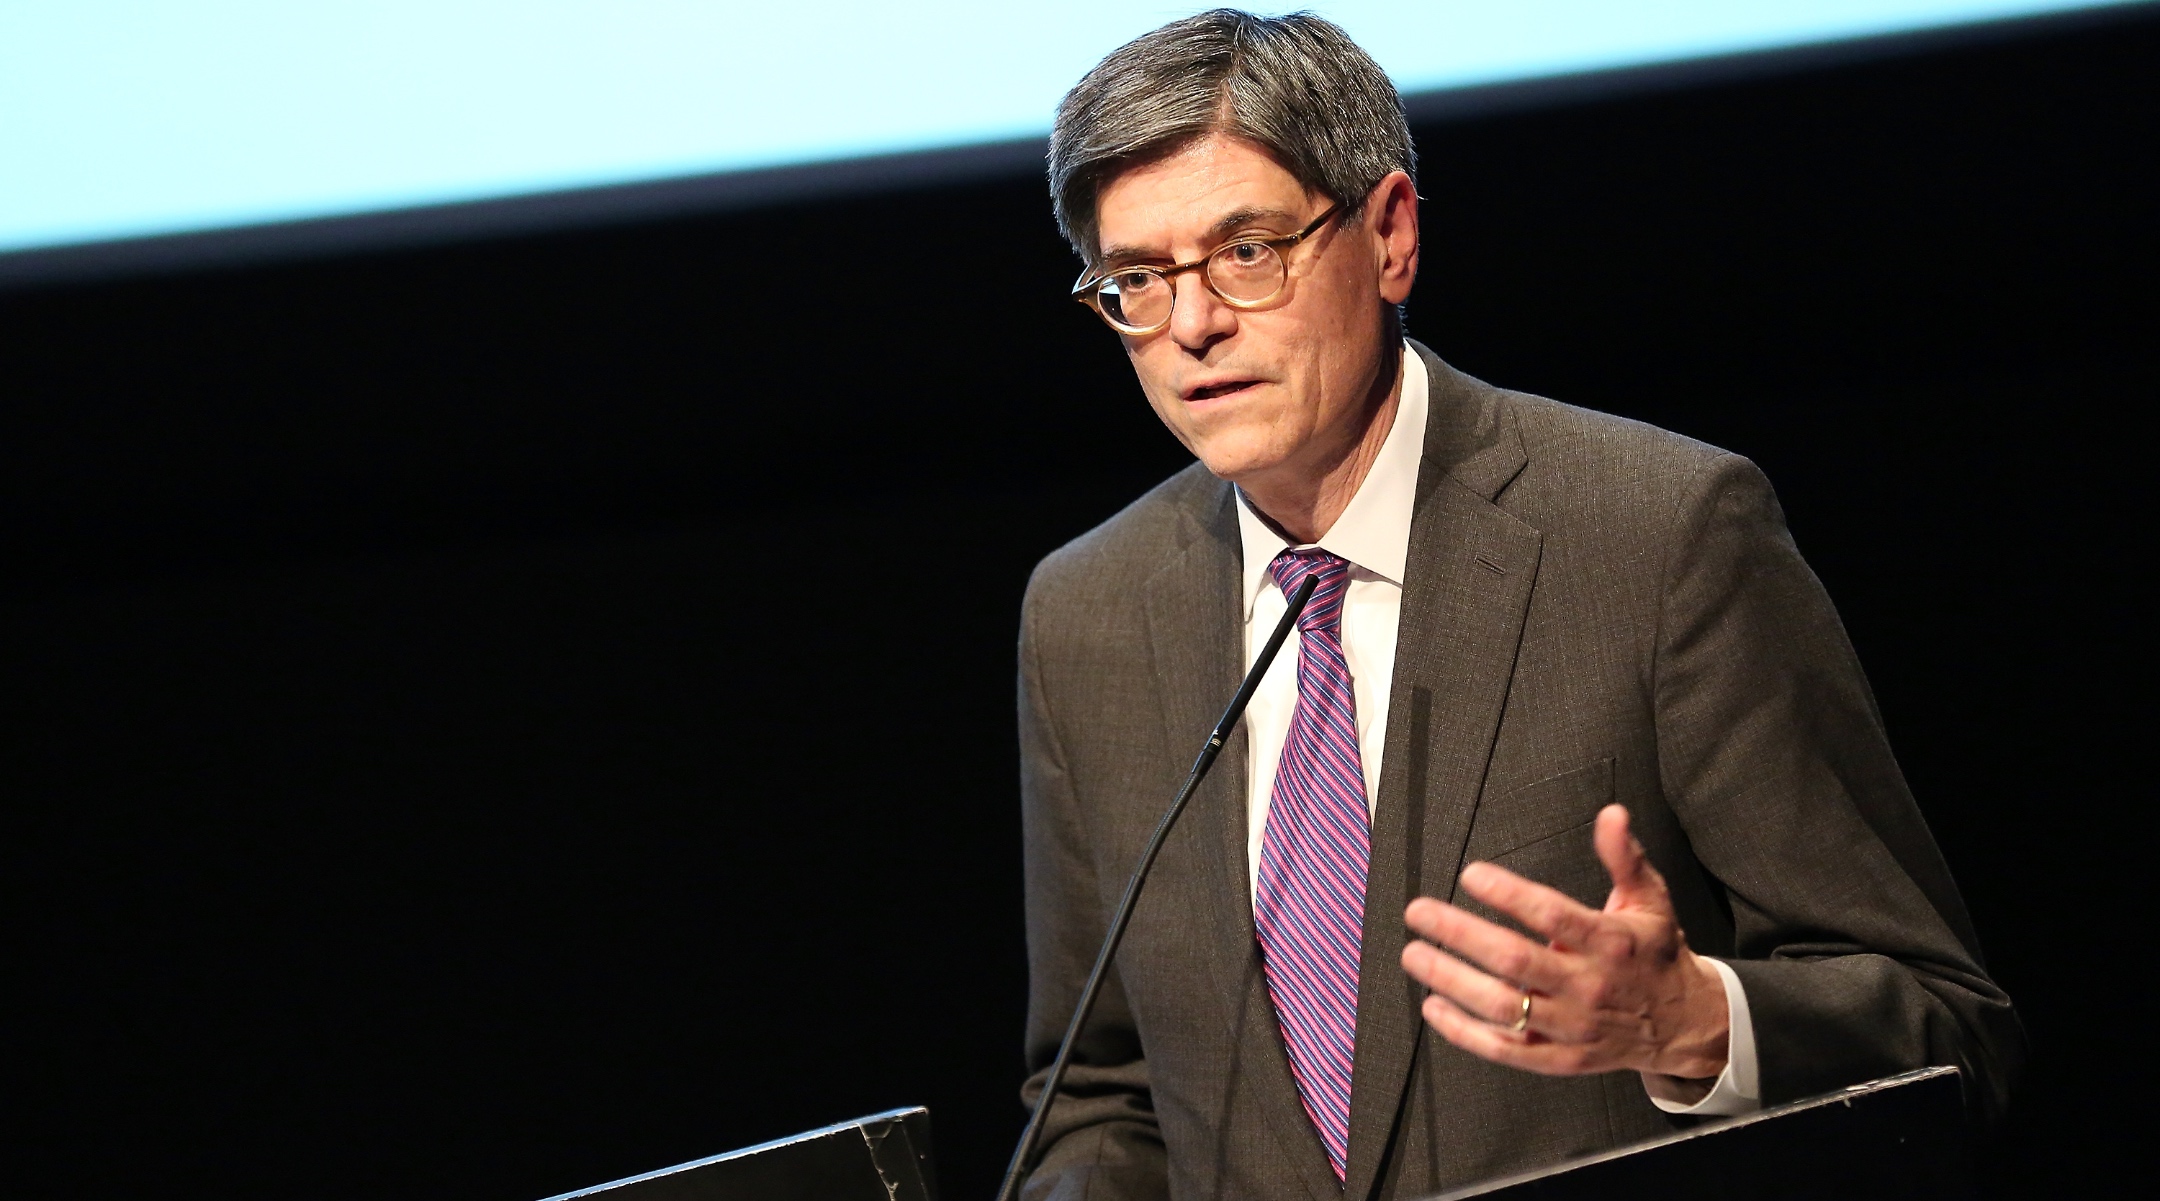 Honoree Jacob Lew speaks on stage during the Queens Community House’s 2018 Strengthening Neighborhoods Inspiring Change Gala at Museum of Moving Image in New York, Oct. 23, 2018. (Monica Schipper/Getty Images for Queens Community House)